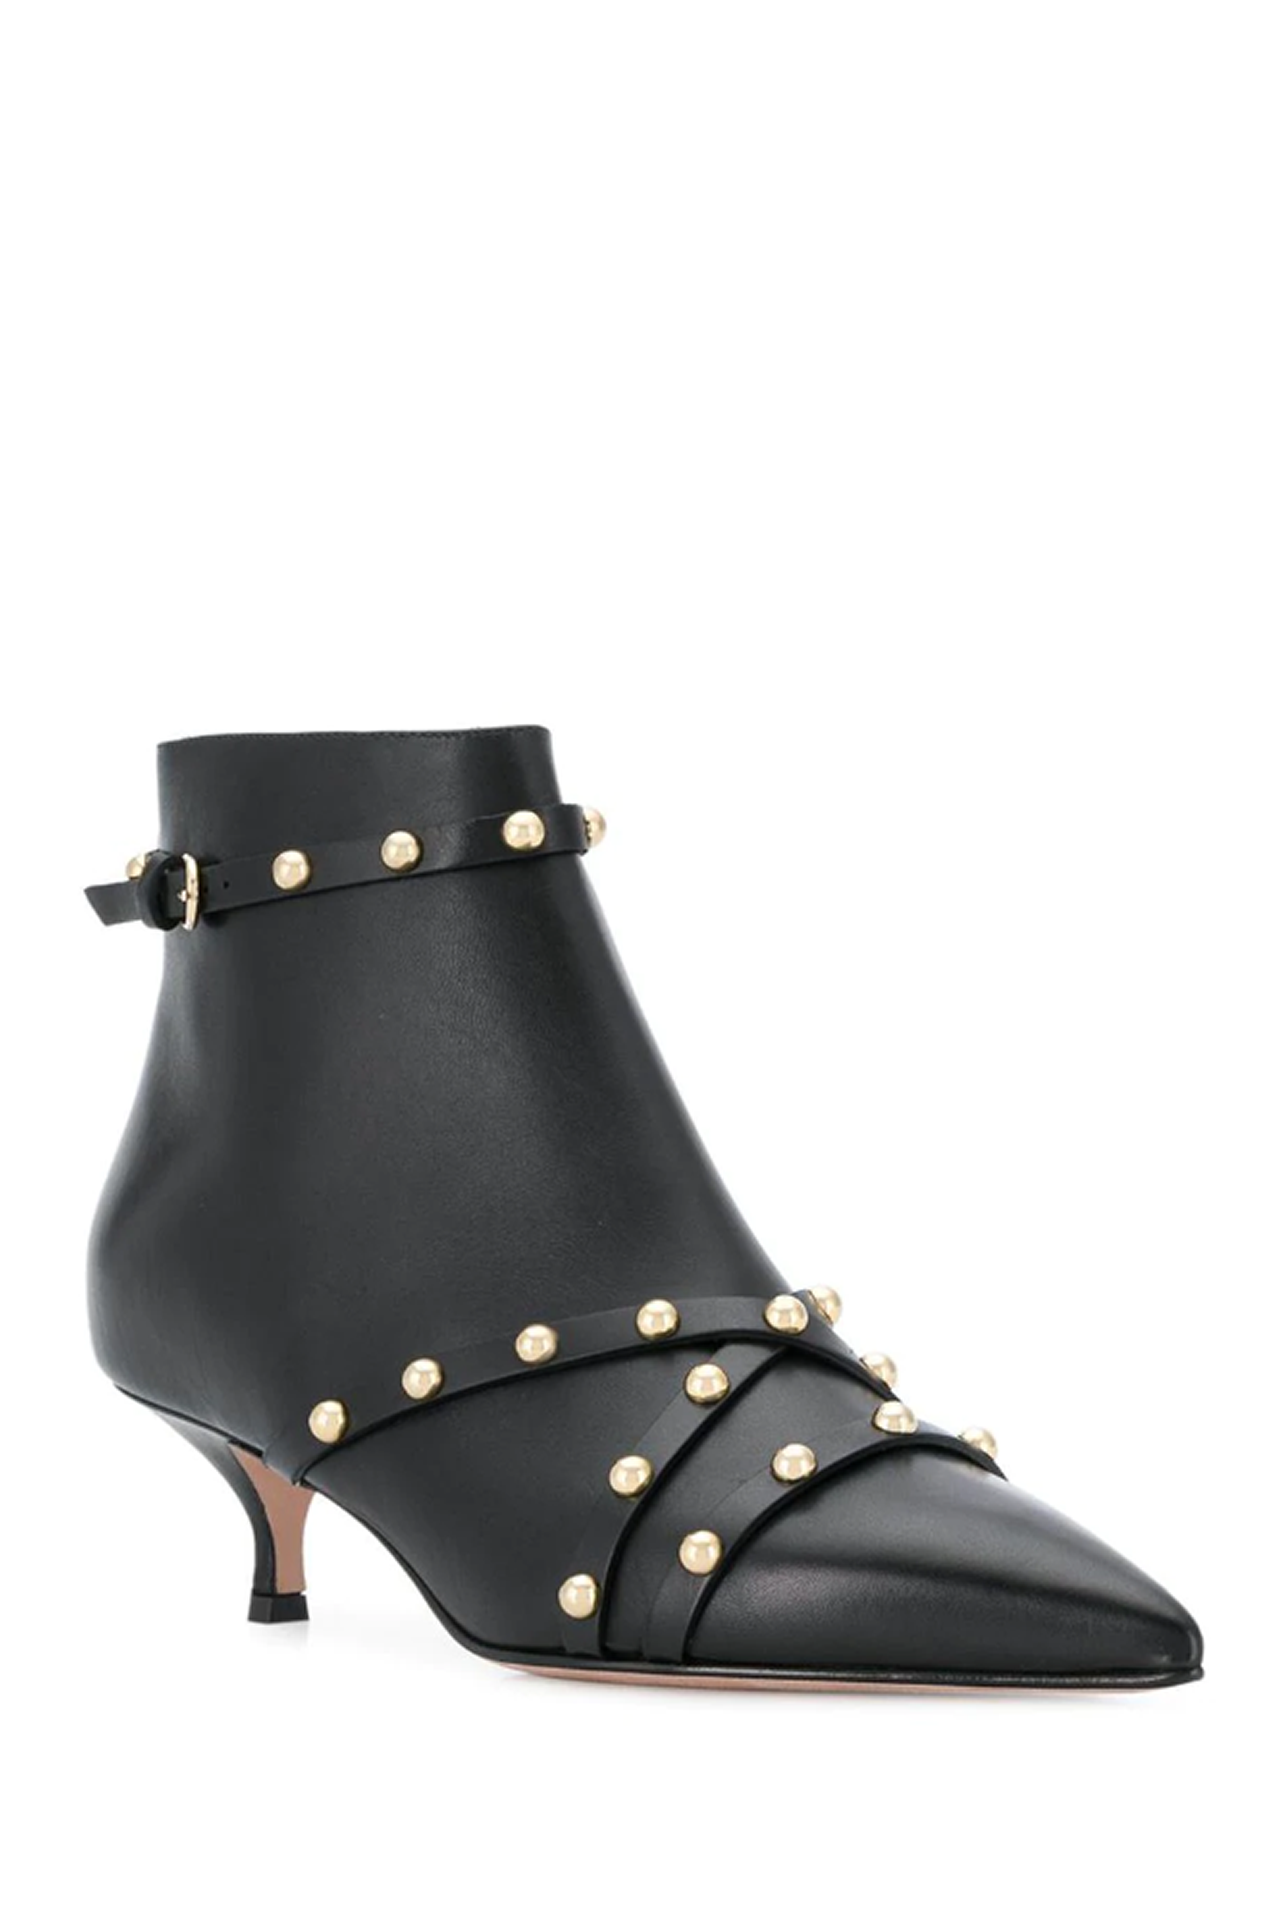 Red Valentino, ankle Boots